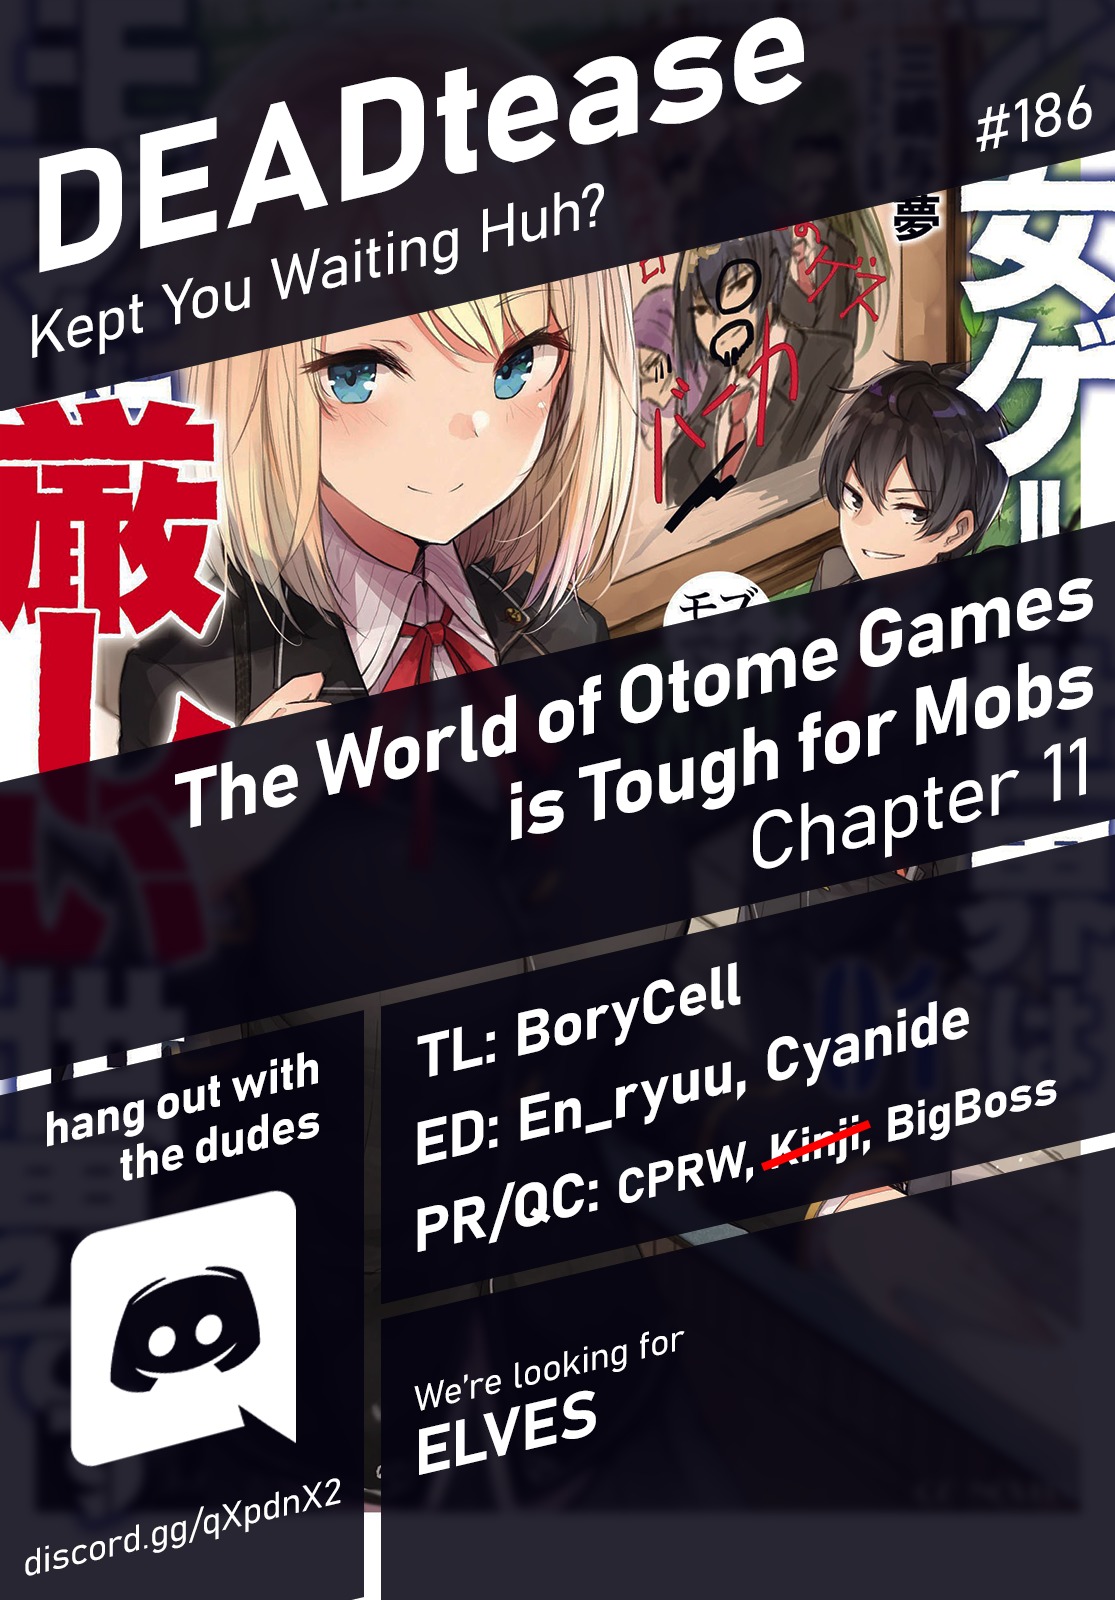 The World of Otome Games is Tough for Mobs ch.11